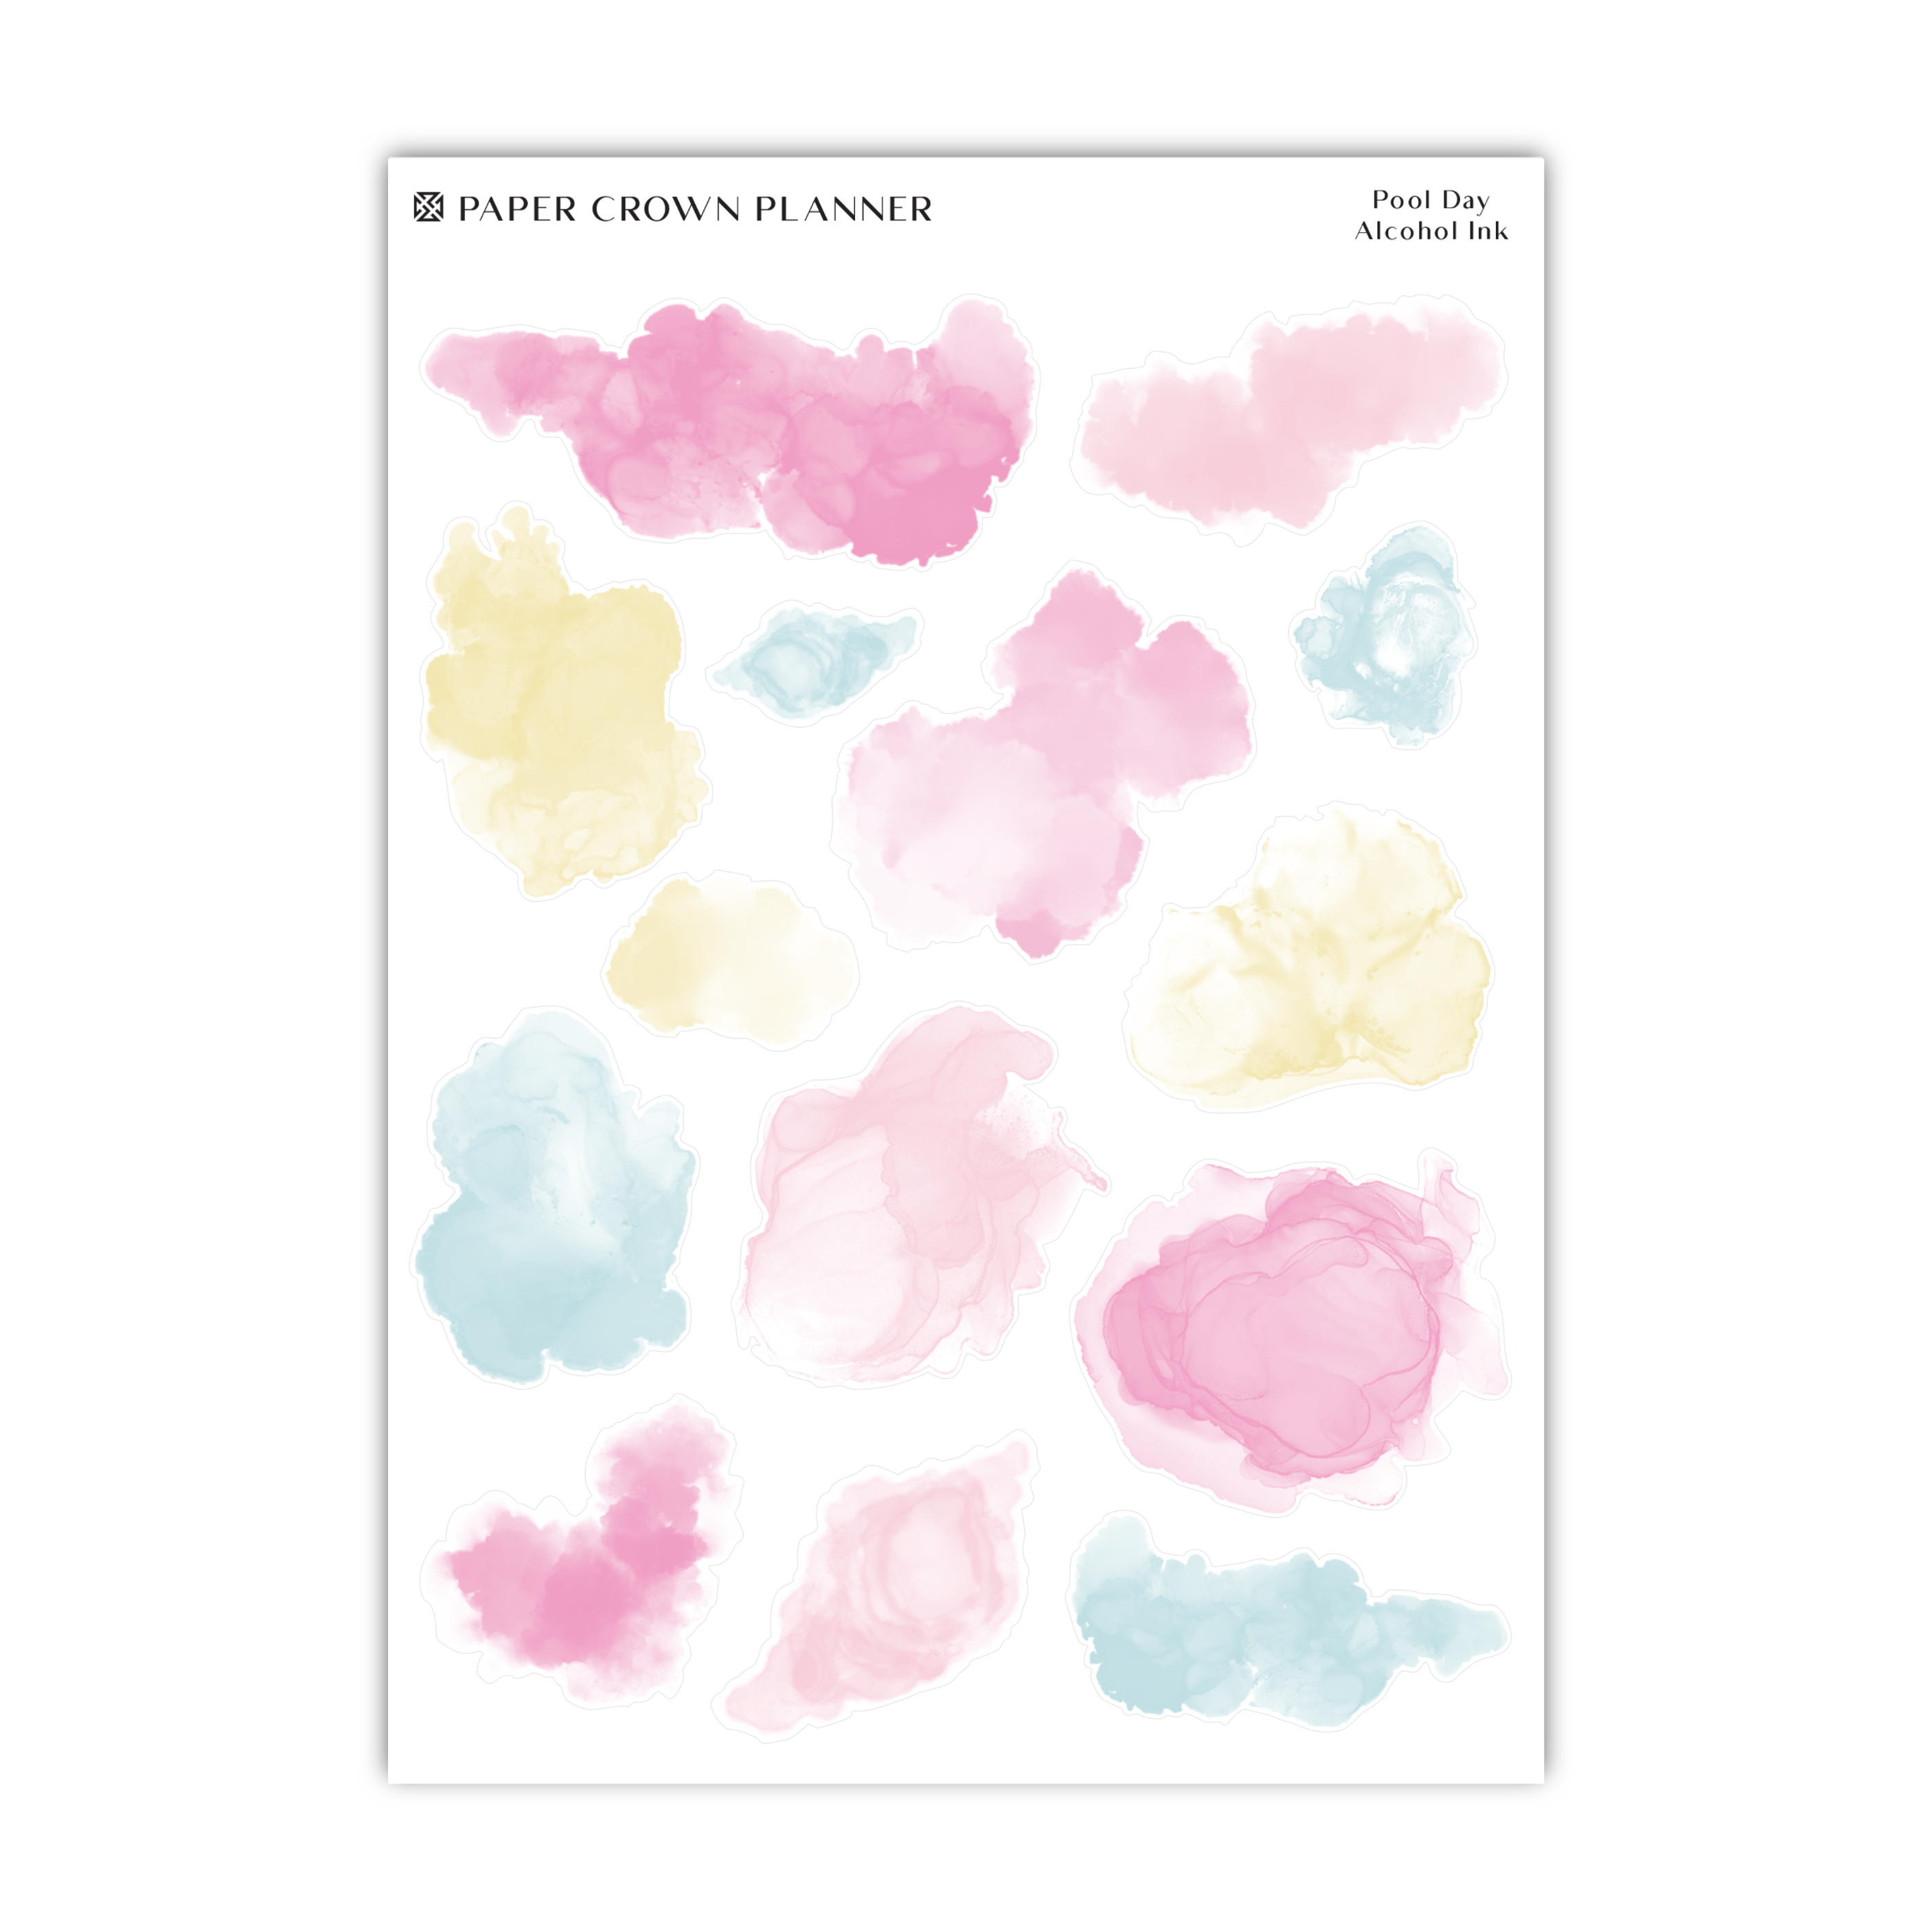 a sheet of watercolor paint on a white background